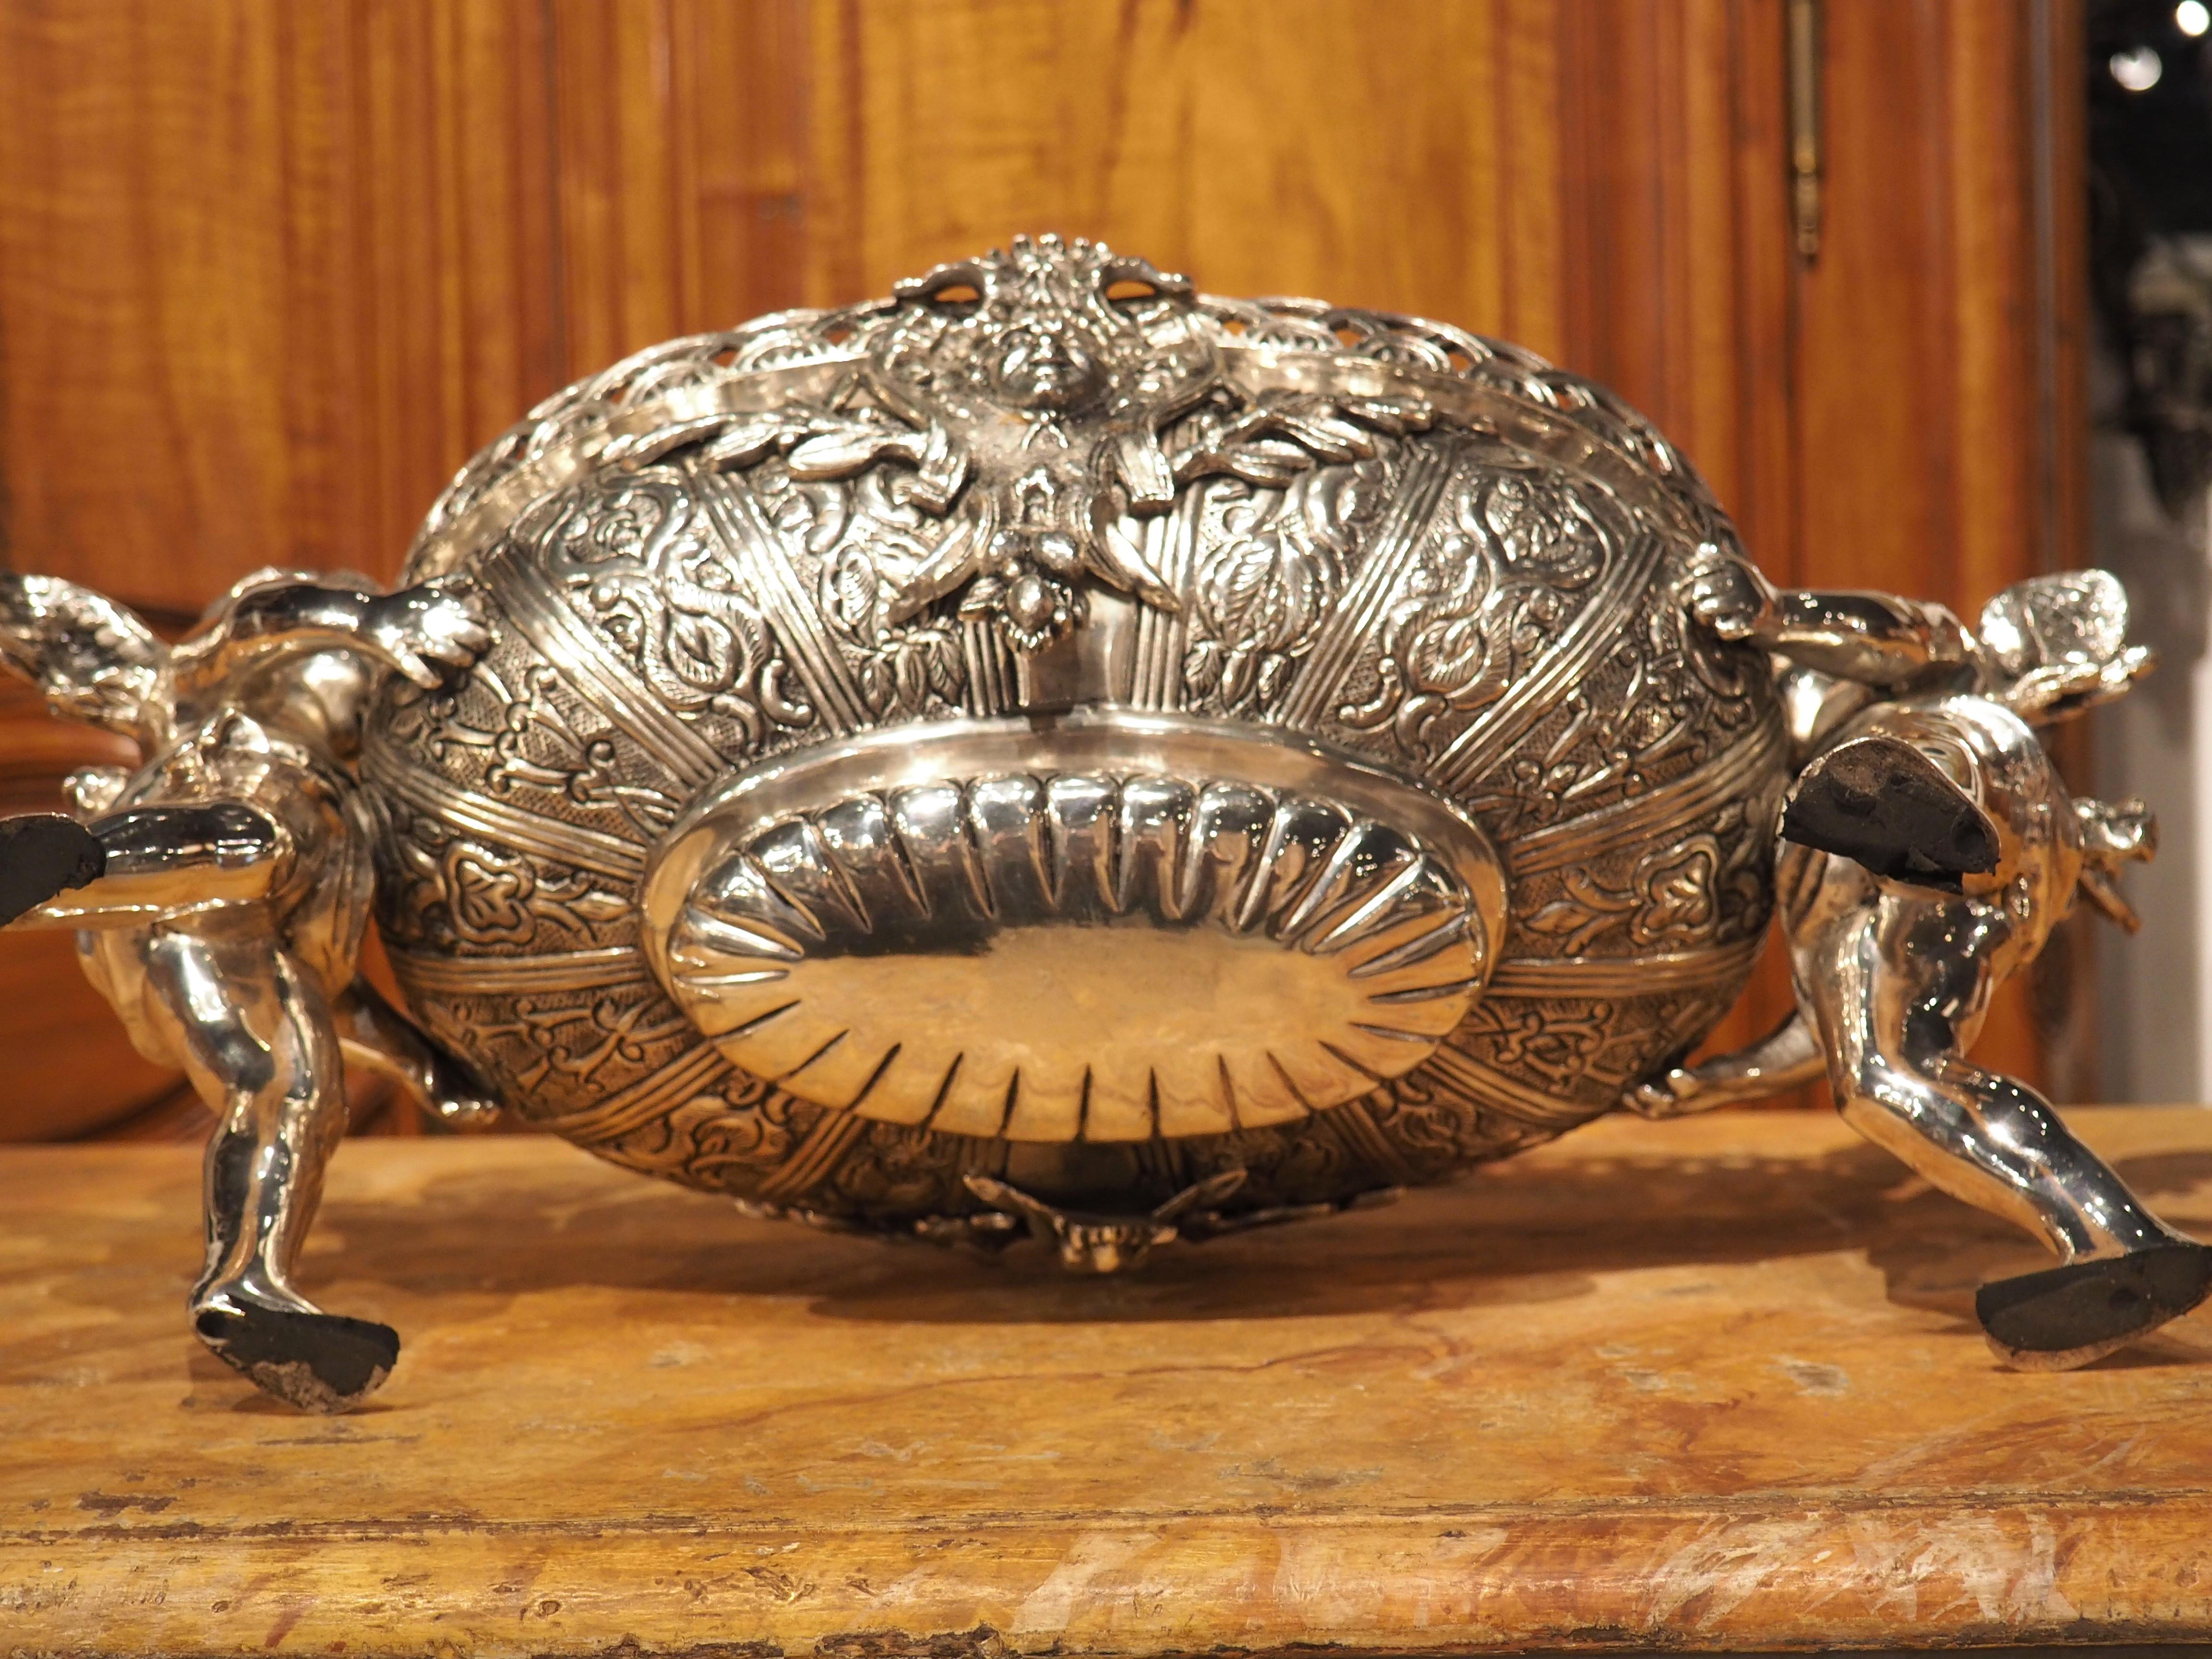 This silvered bronze French jardiniere has a lovely shimmering patina that augments the Louis XV-style motifs. Two winged putti form support legs to the ovate bowl adorned with a repeating and pierced niche that encircles the opening, interrupted